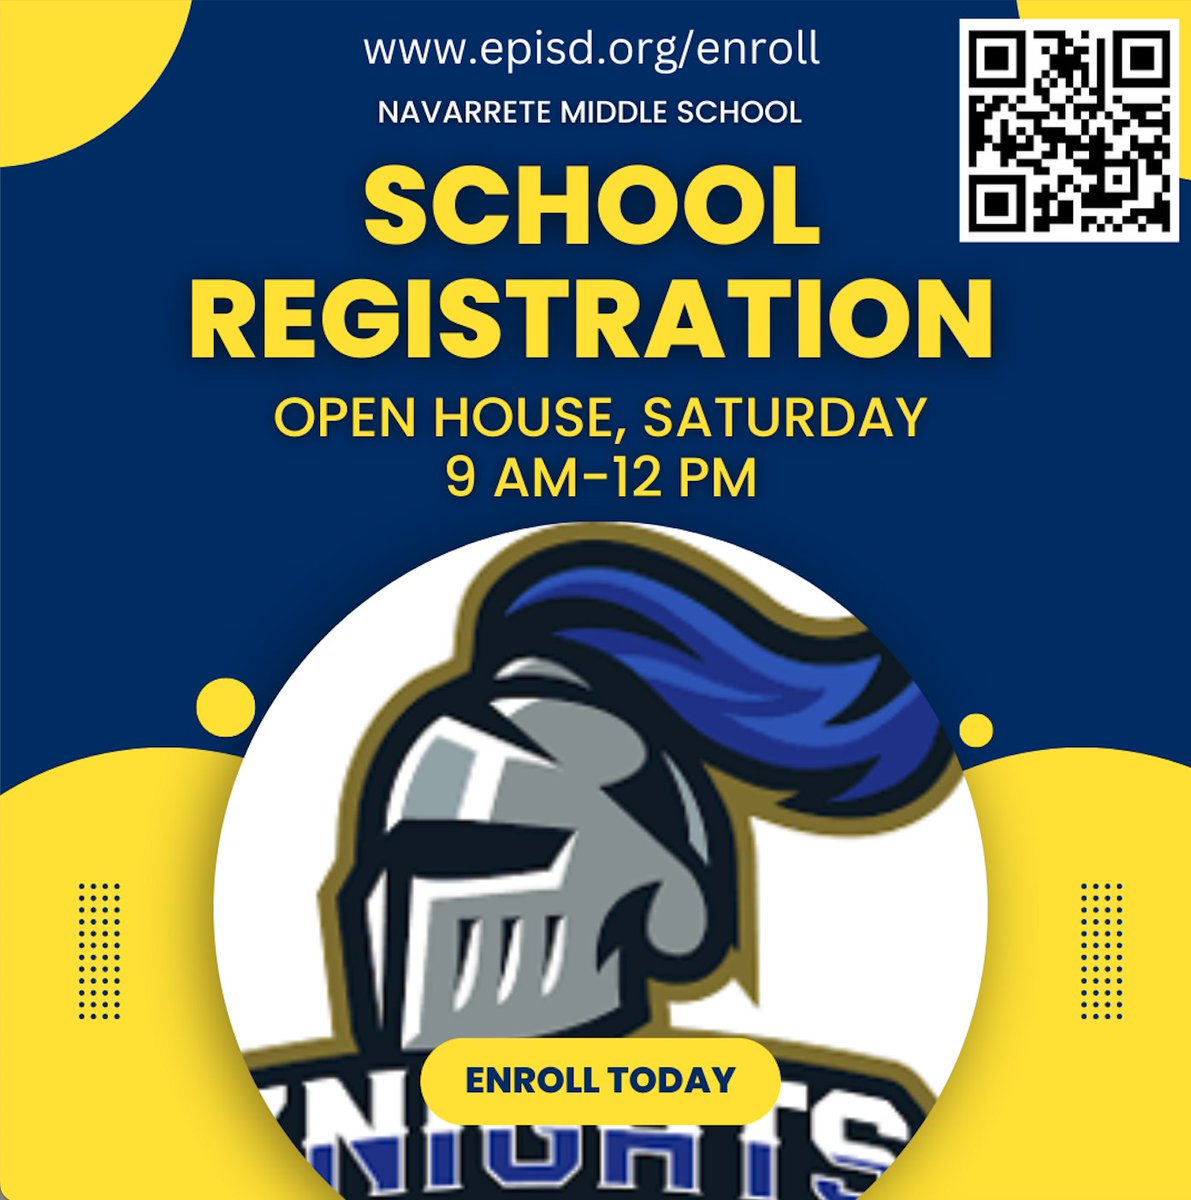 Stop by and register today to receive coupons to Burger King, Peter Piper, or Boss Chicken. Today only from 9-12! #KnightNation #ItStartsWithUs